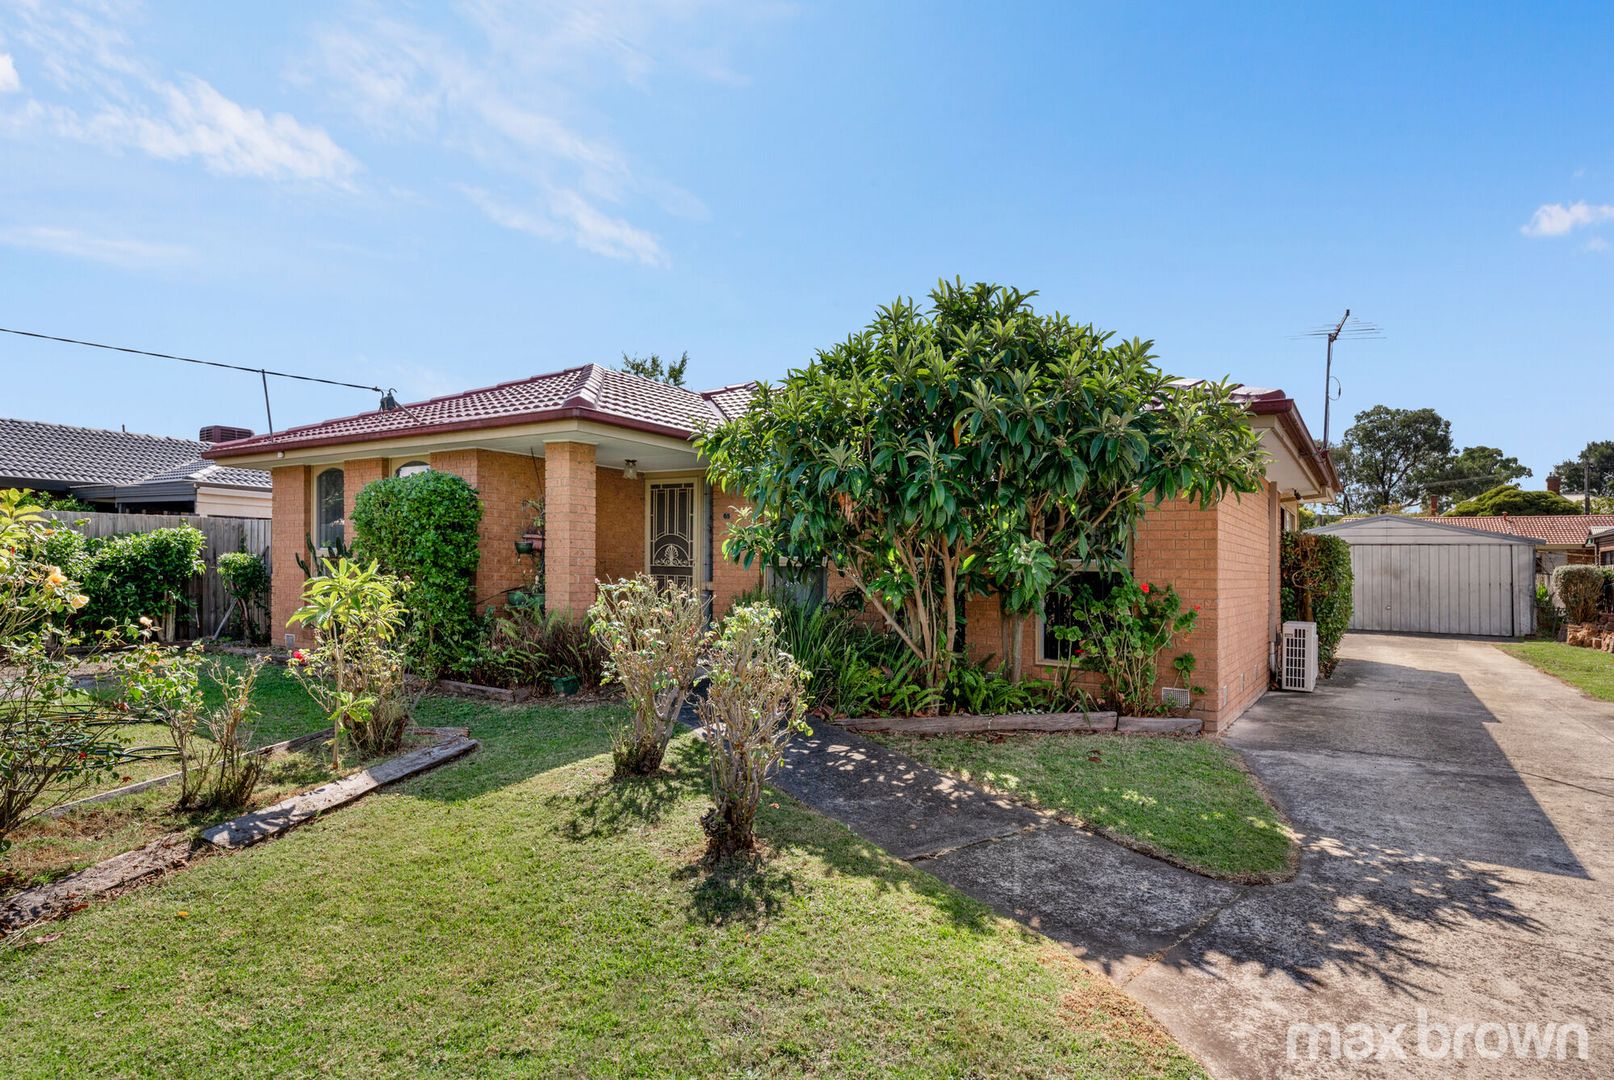 65 Beresford Road, Lilydale VIC 3140